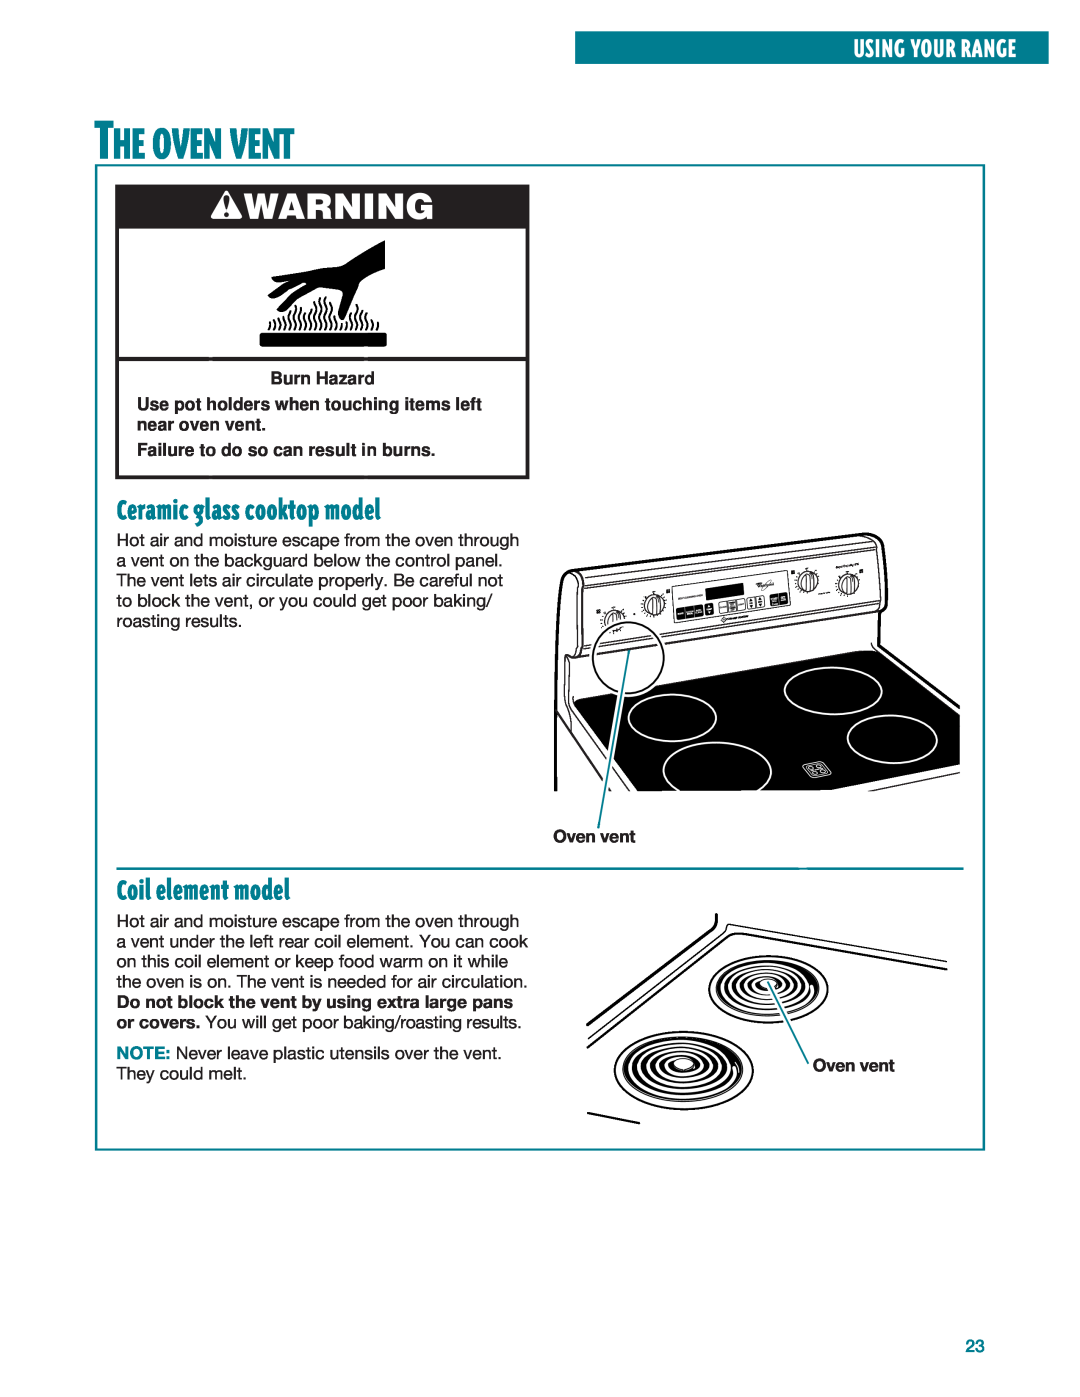 Whirlpool RF385PXE, RF386PXE The Oven Vent, Ceramic glass cooktop model, Coil element model, wWARNING, Using Your Range 